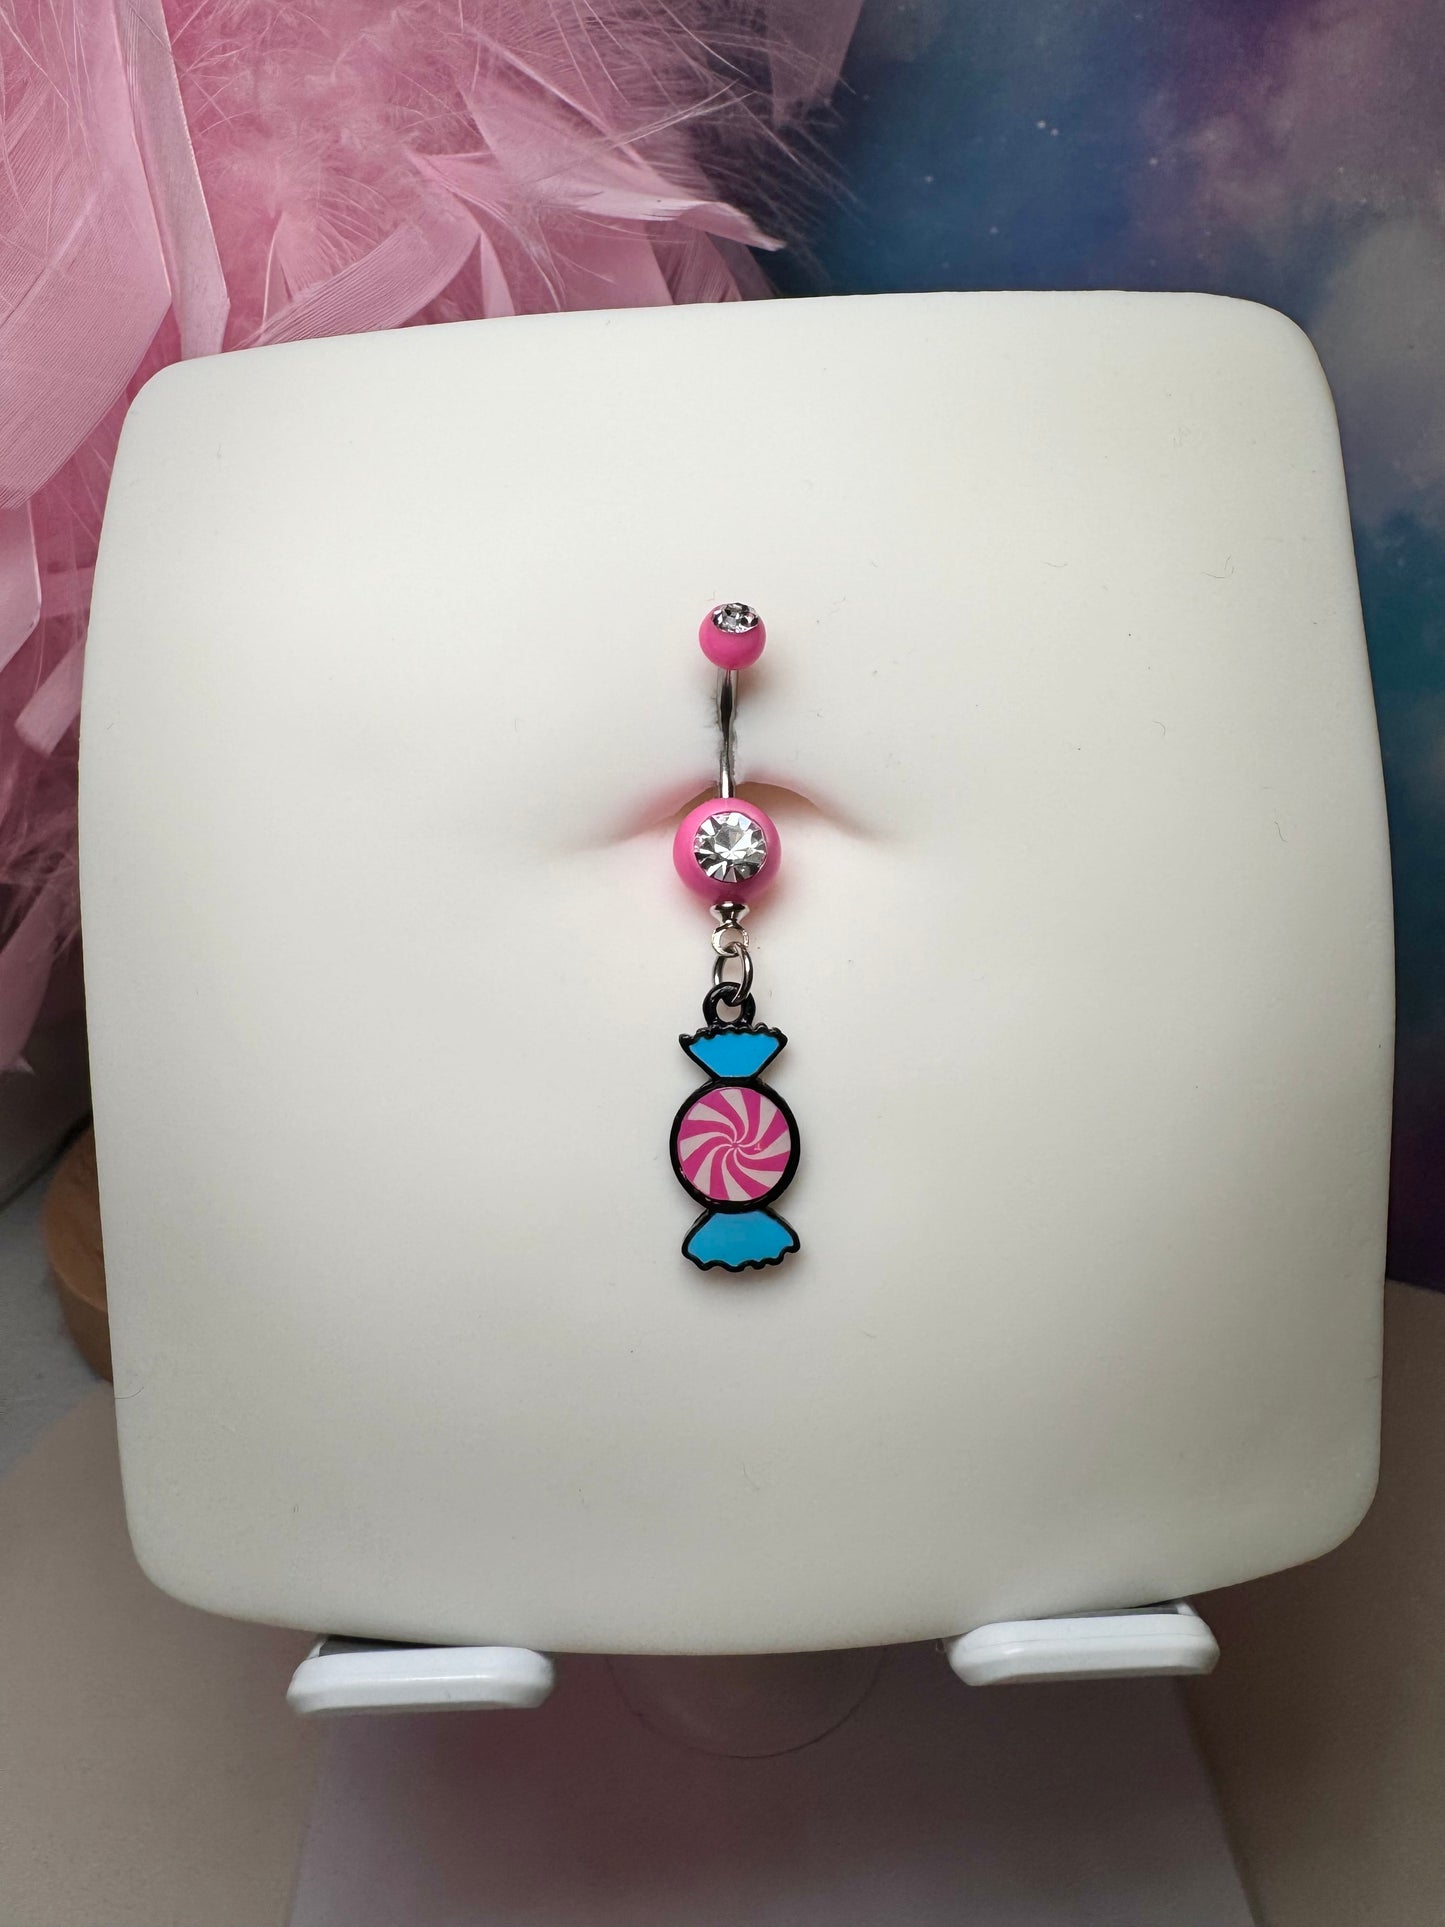 Peppermint belly ring